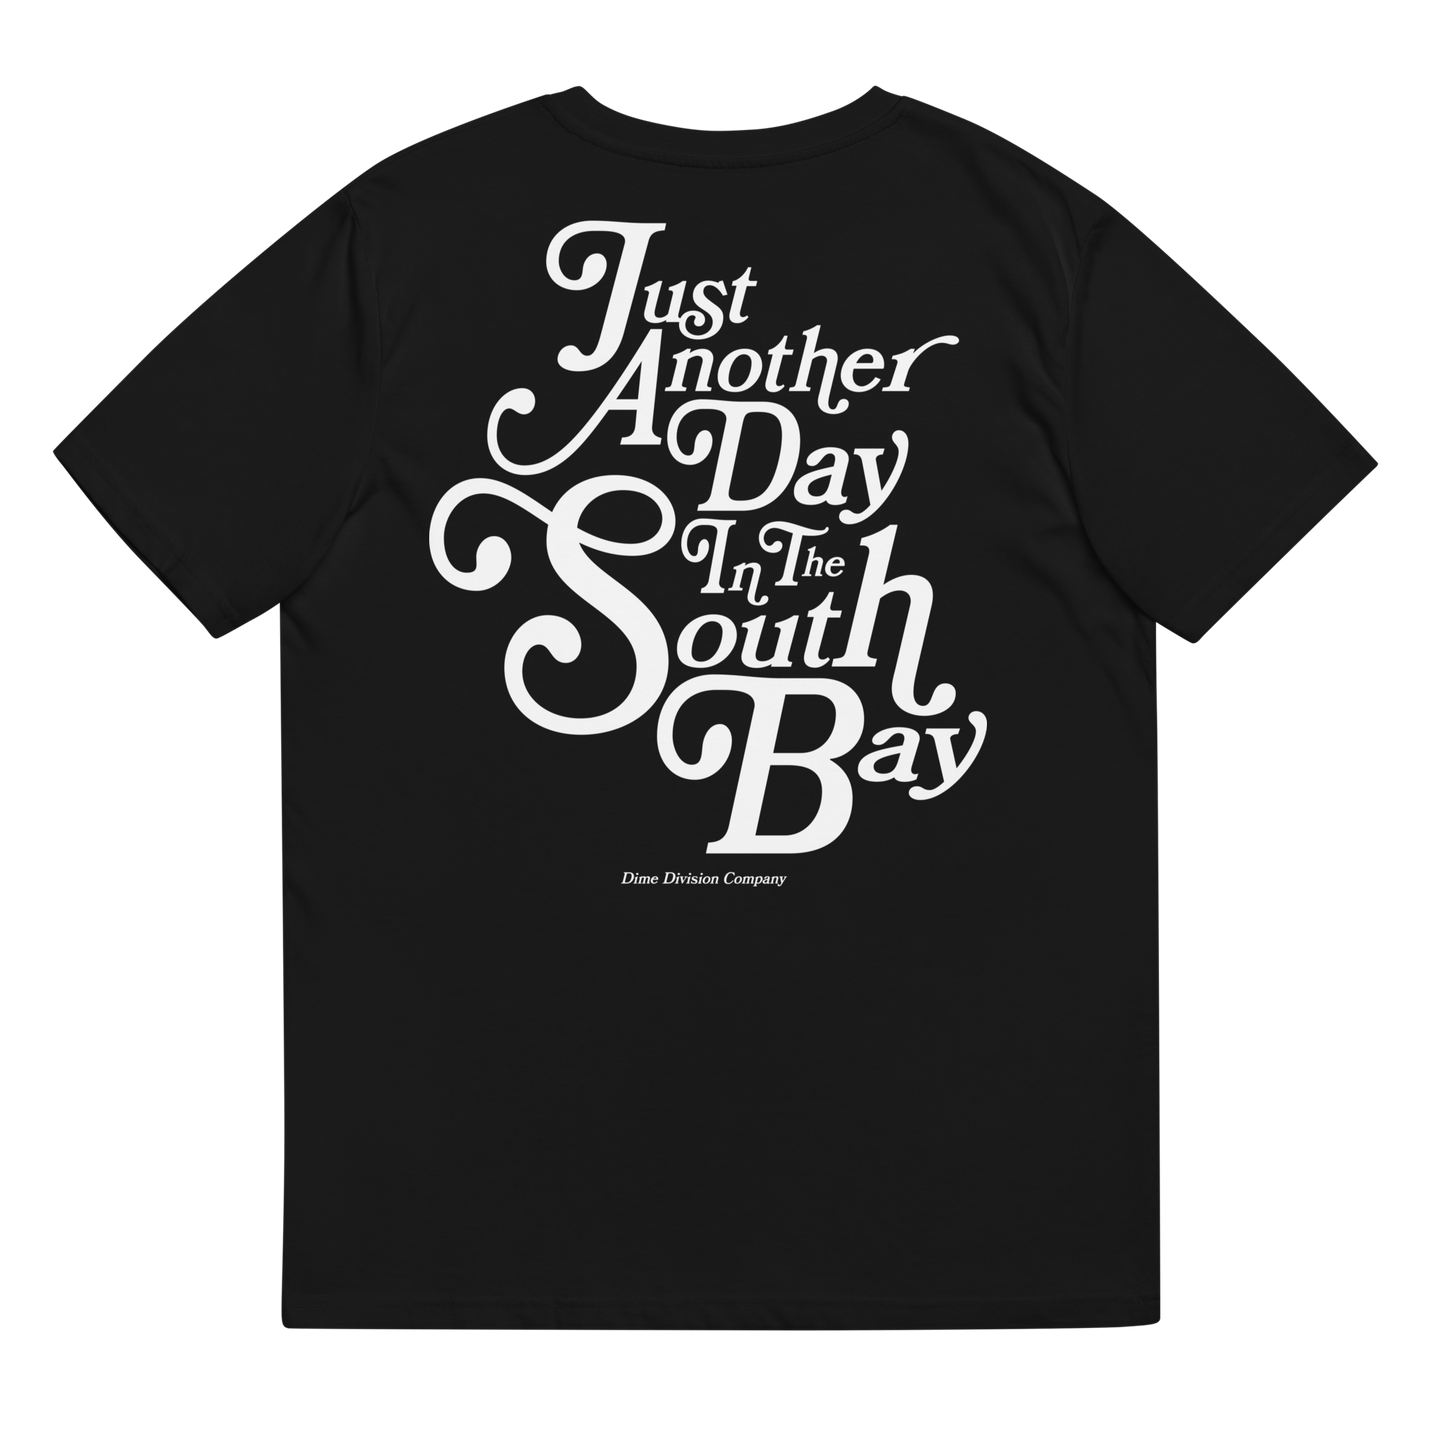 Just Another Day - Southbay Premium Tee